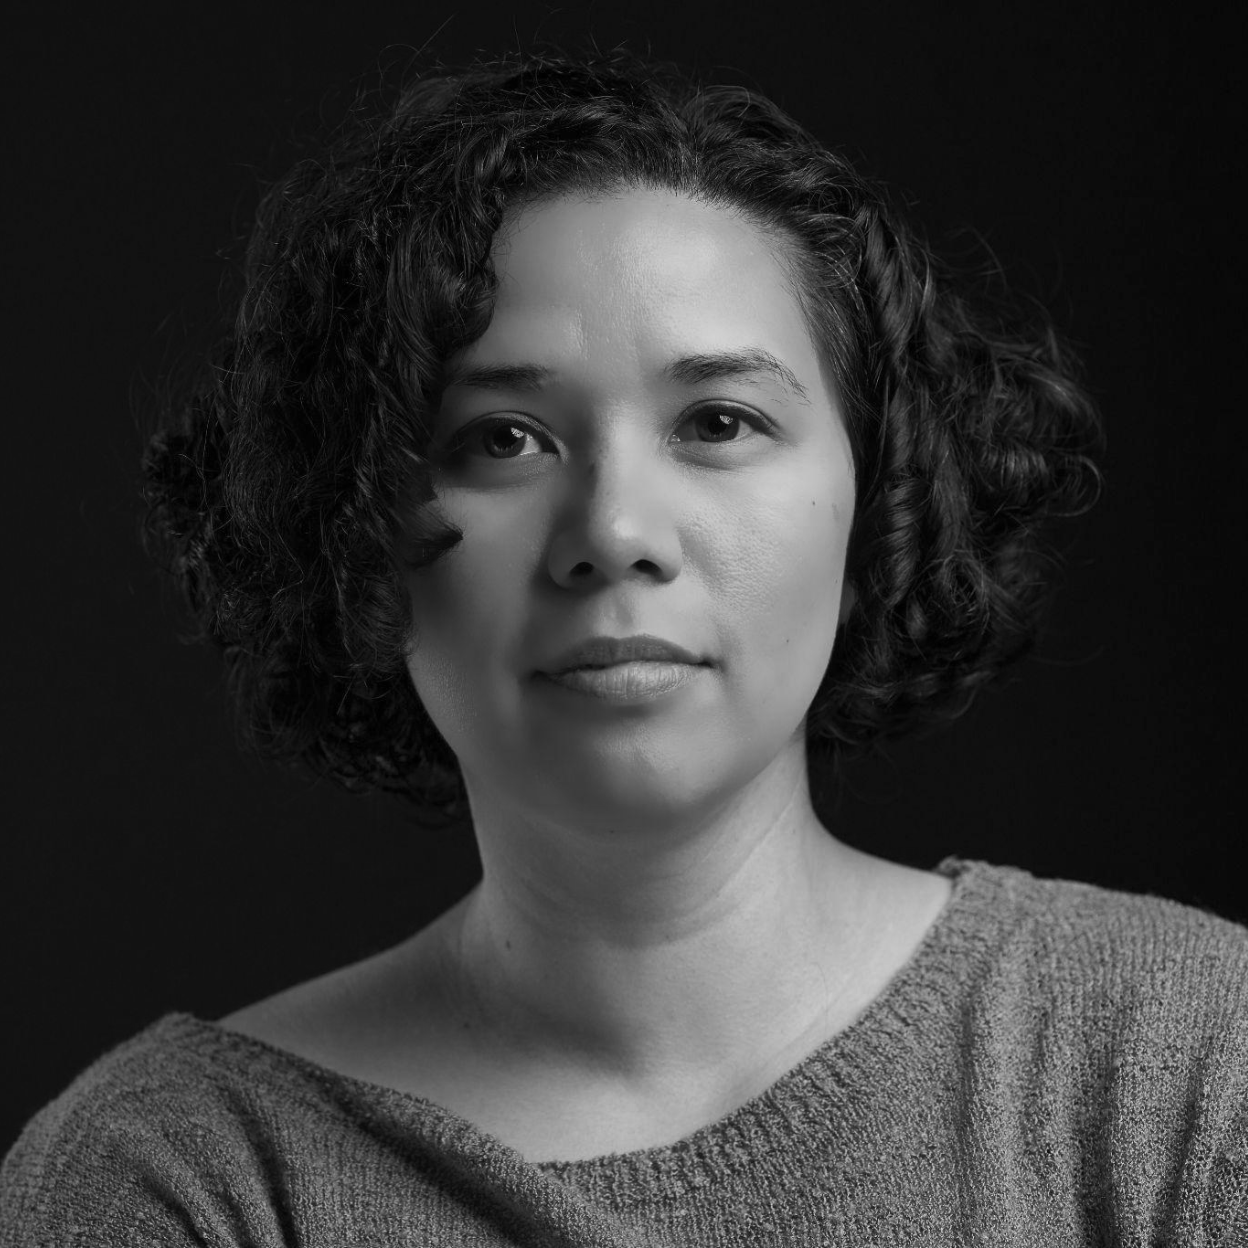 Black and white portrait of a person with short, curly hair, wearing a sweater, looking directly at the camera with a neutral expression.